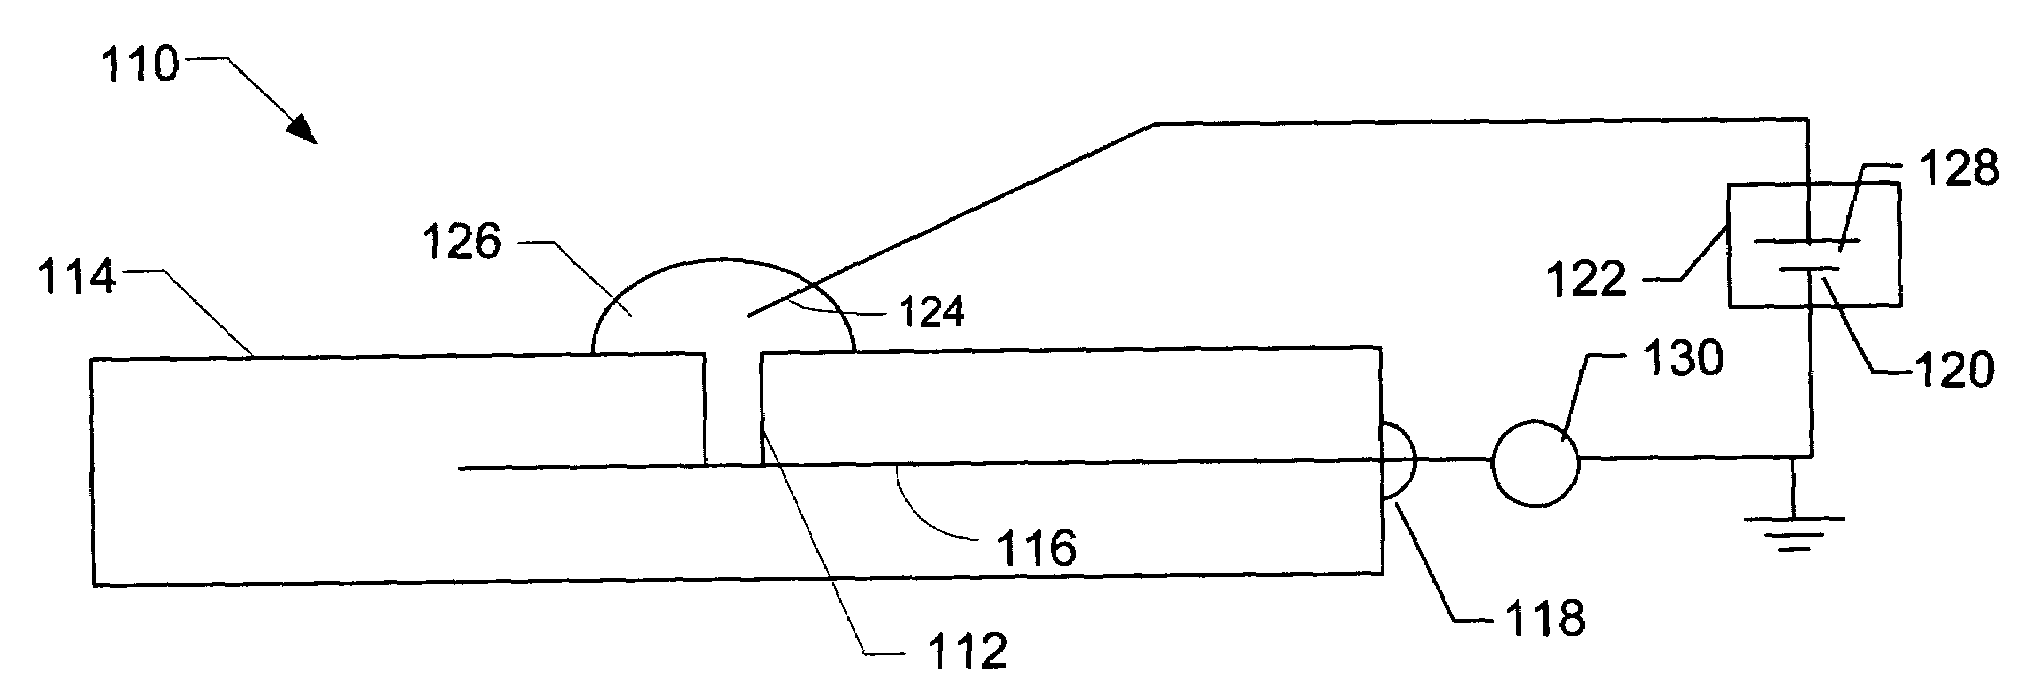 System for modifying small structures using localized charge transfer mechanism to remove or deposit material